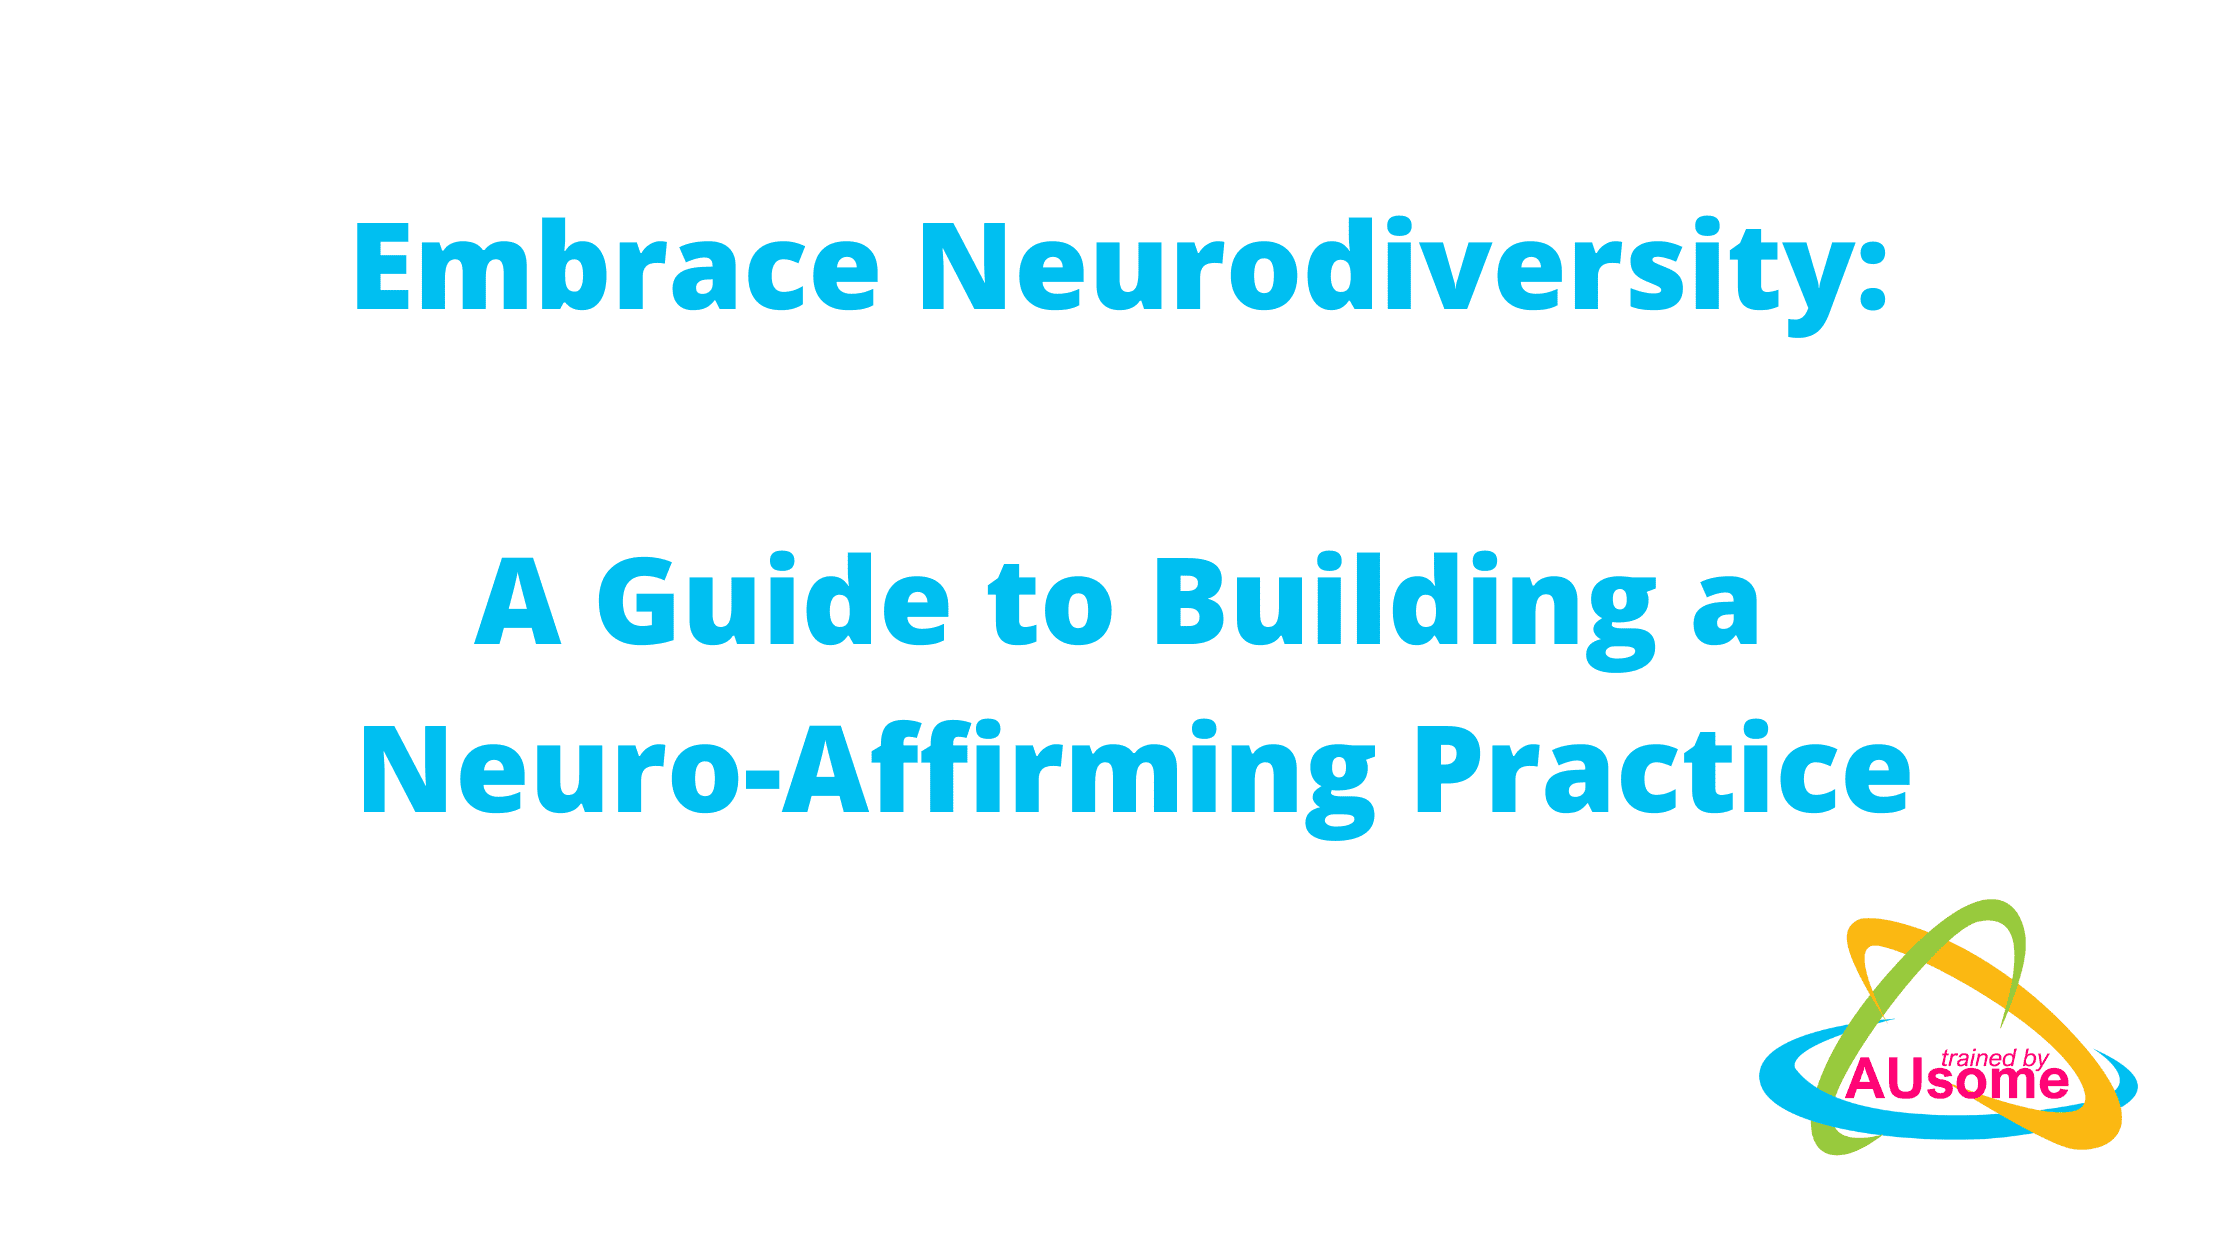 Embrace Neurodiversity: A Guide to Building a Neuro-Affirming Practice